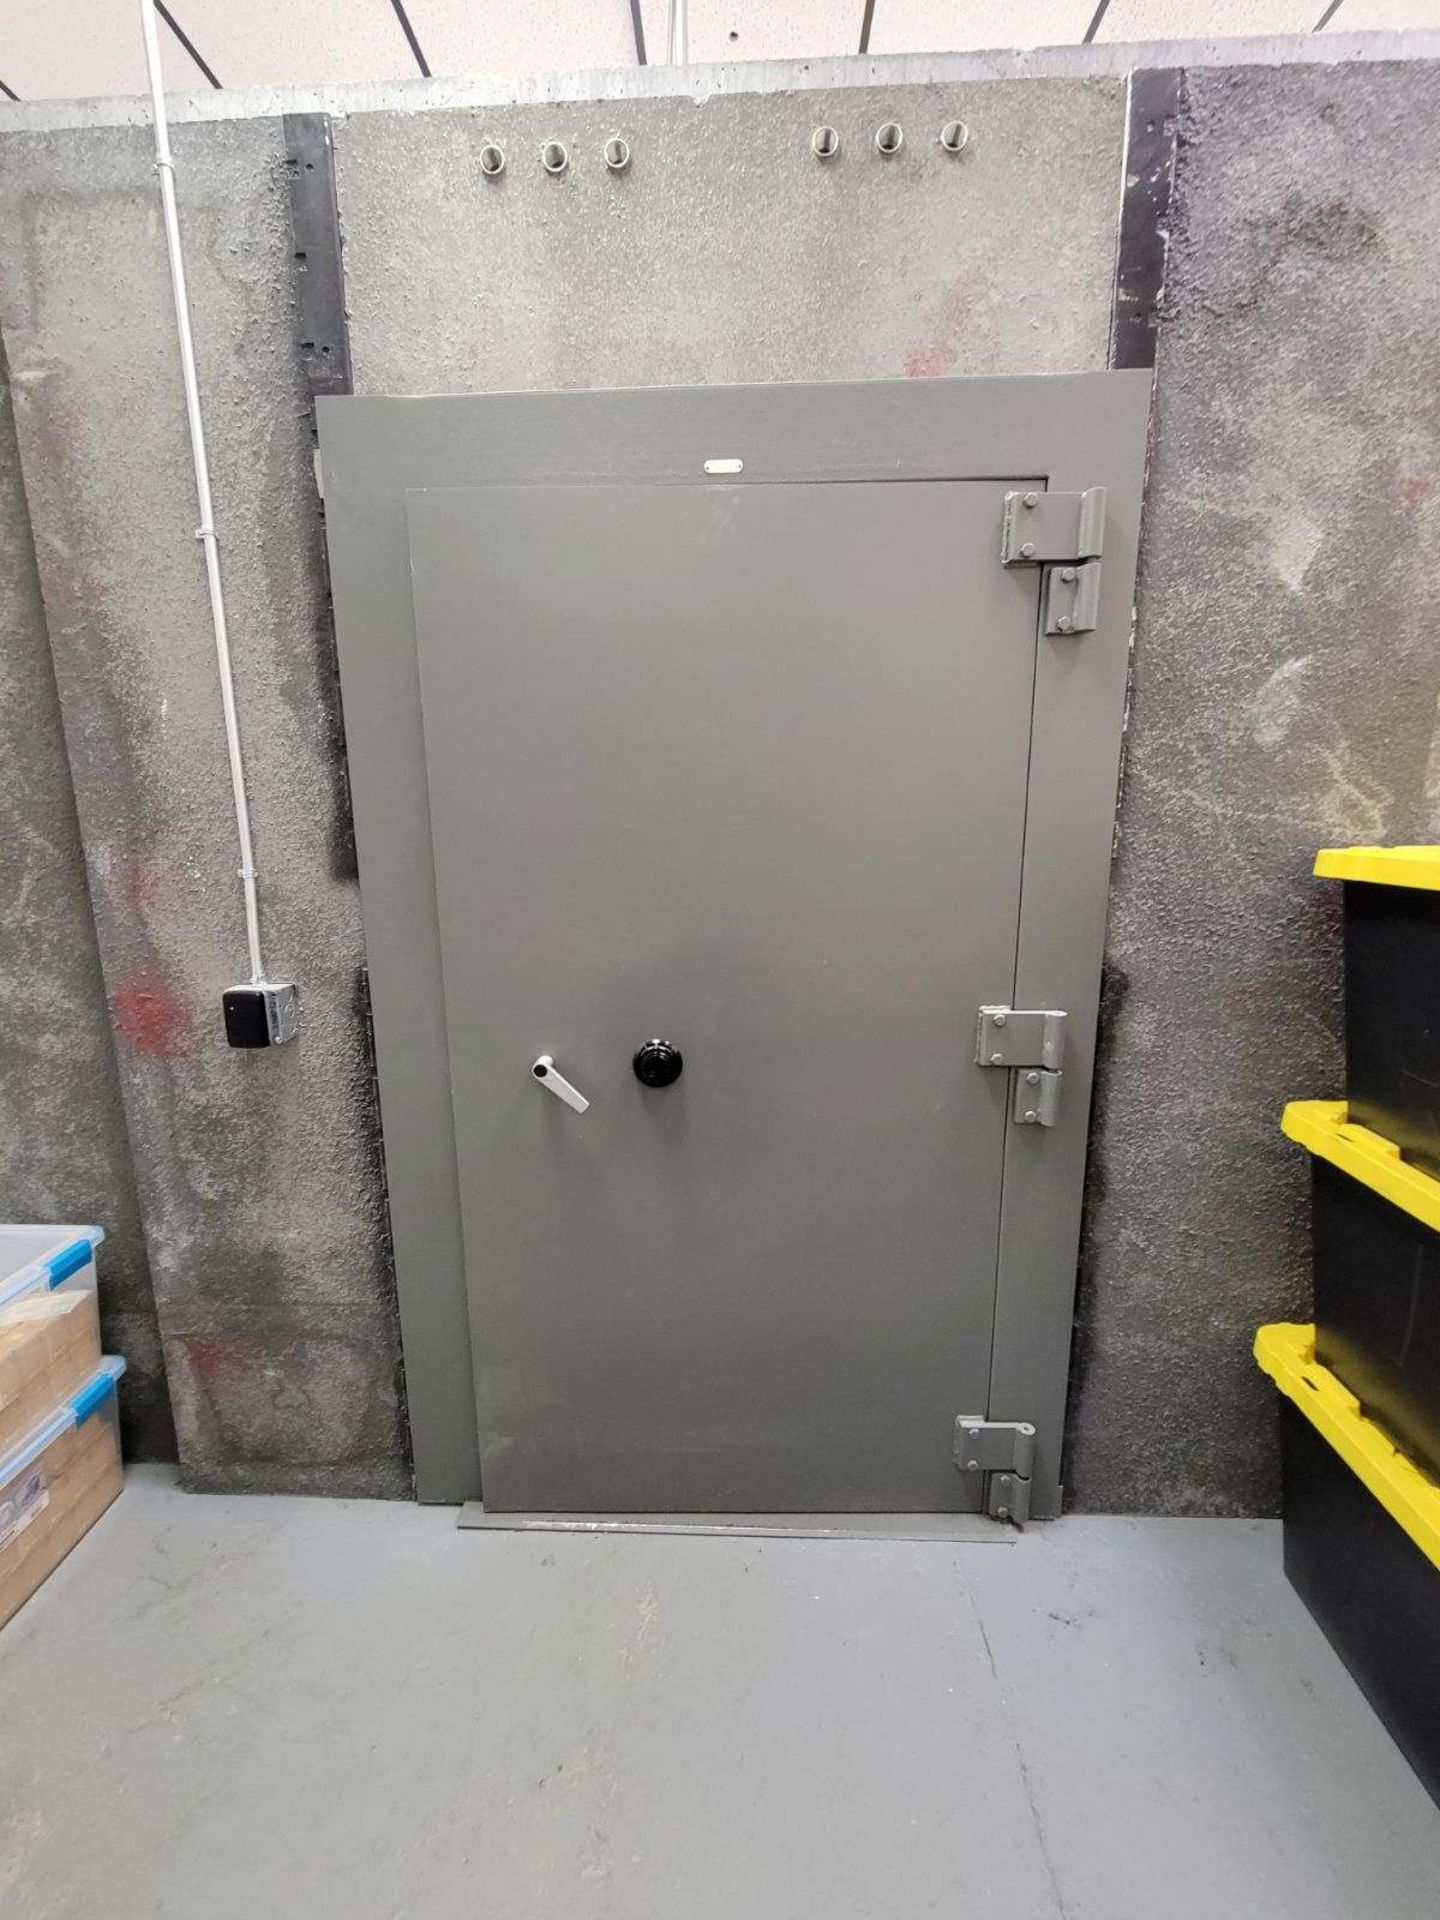 Used Hamilton Class-5 Security Bank Modular Vault w/ Ceiling. OAD: 145" L/D x 145" x 106" H - Image 4 of 5